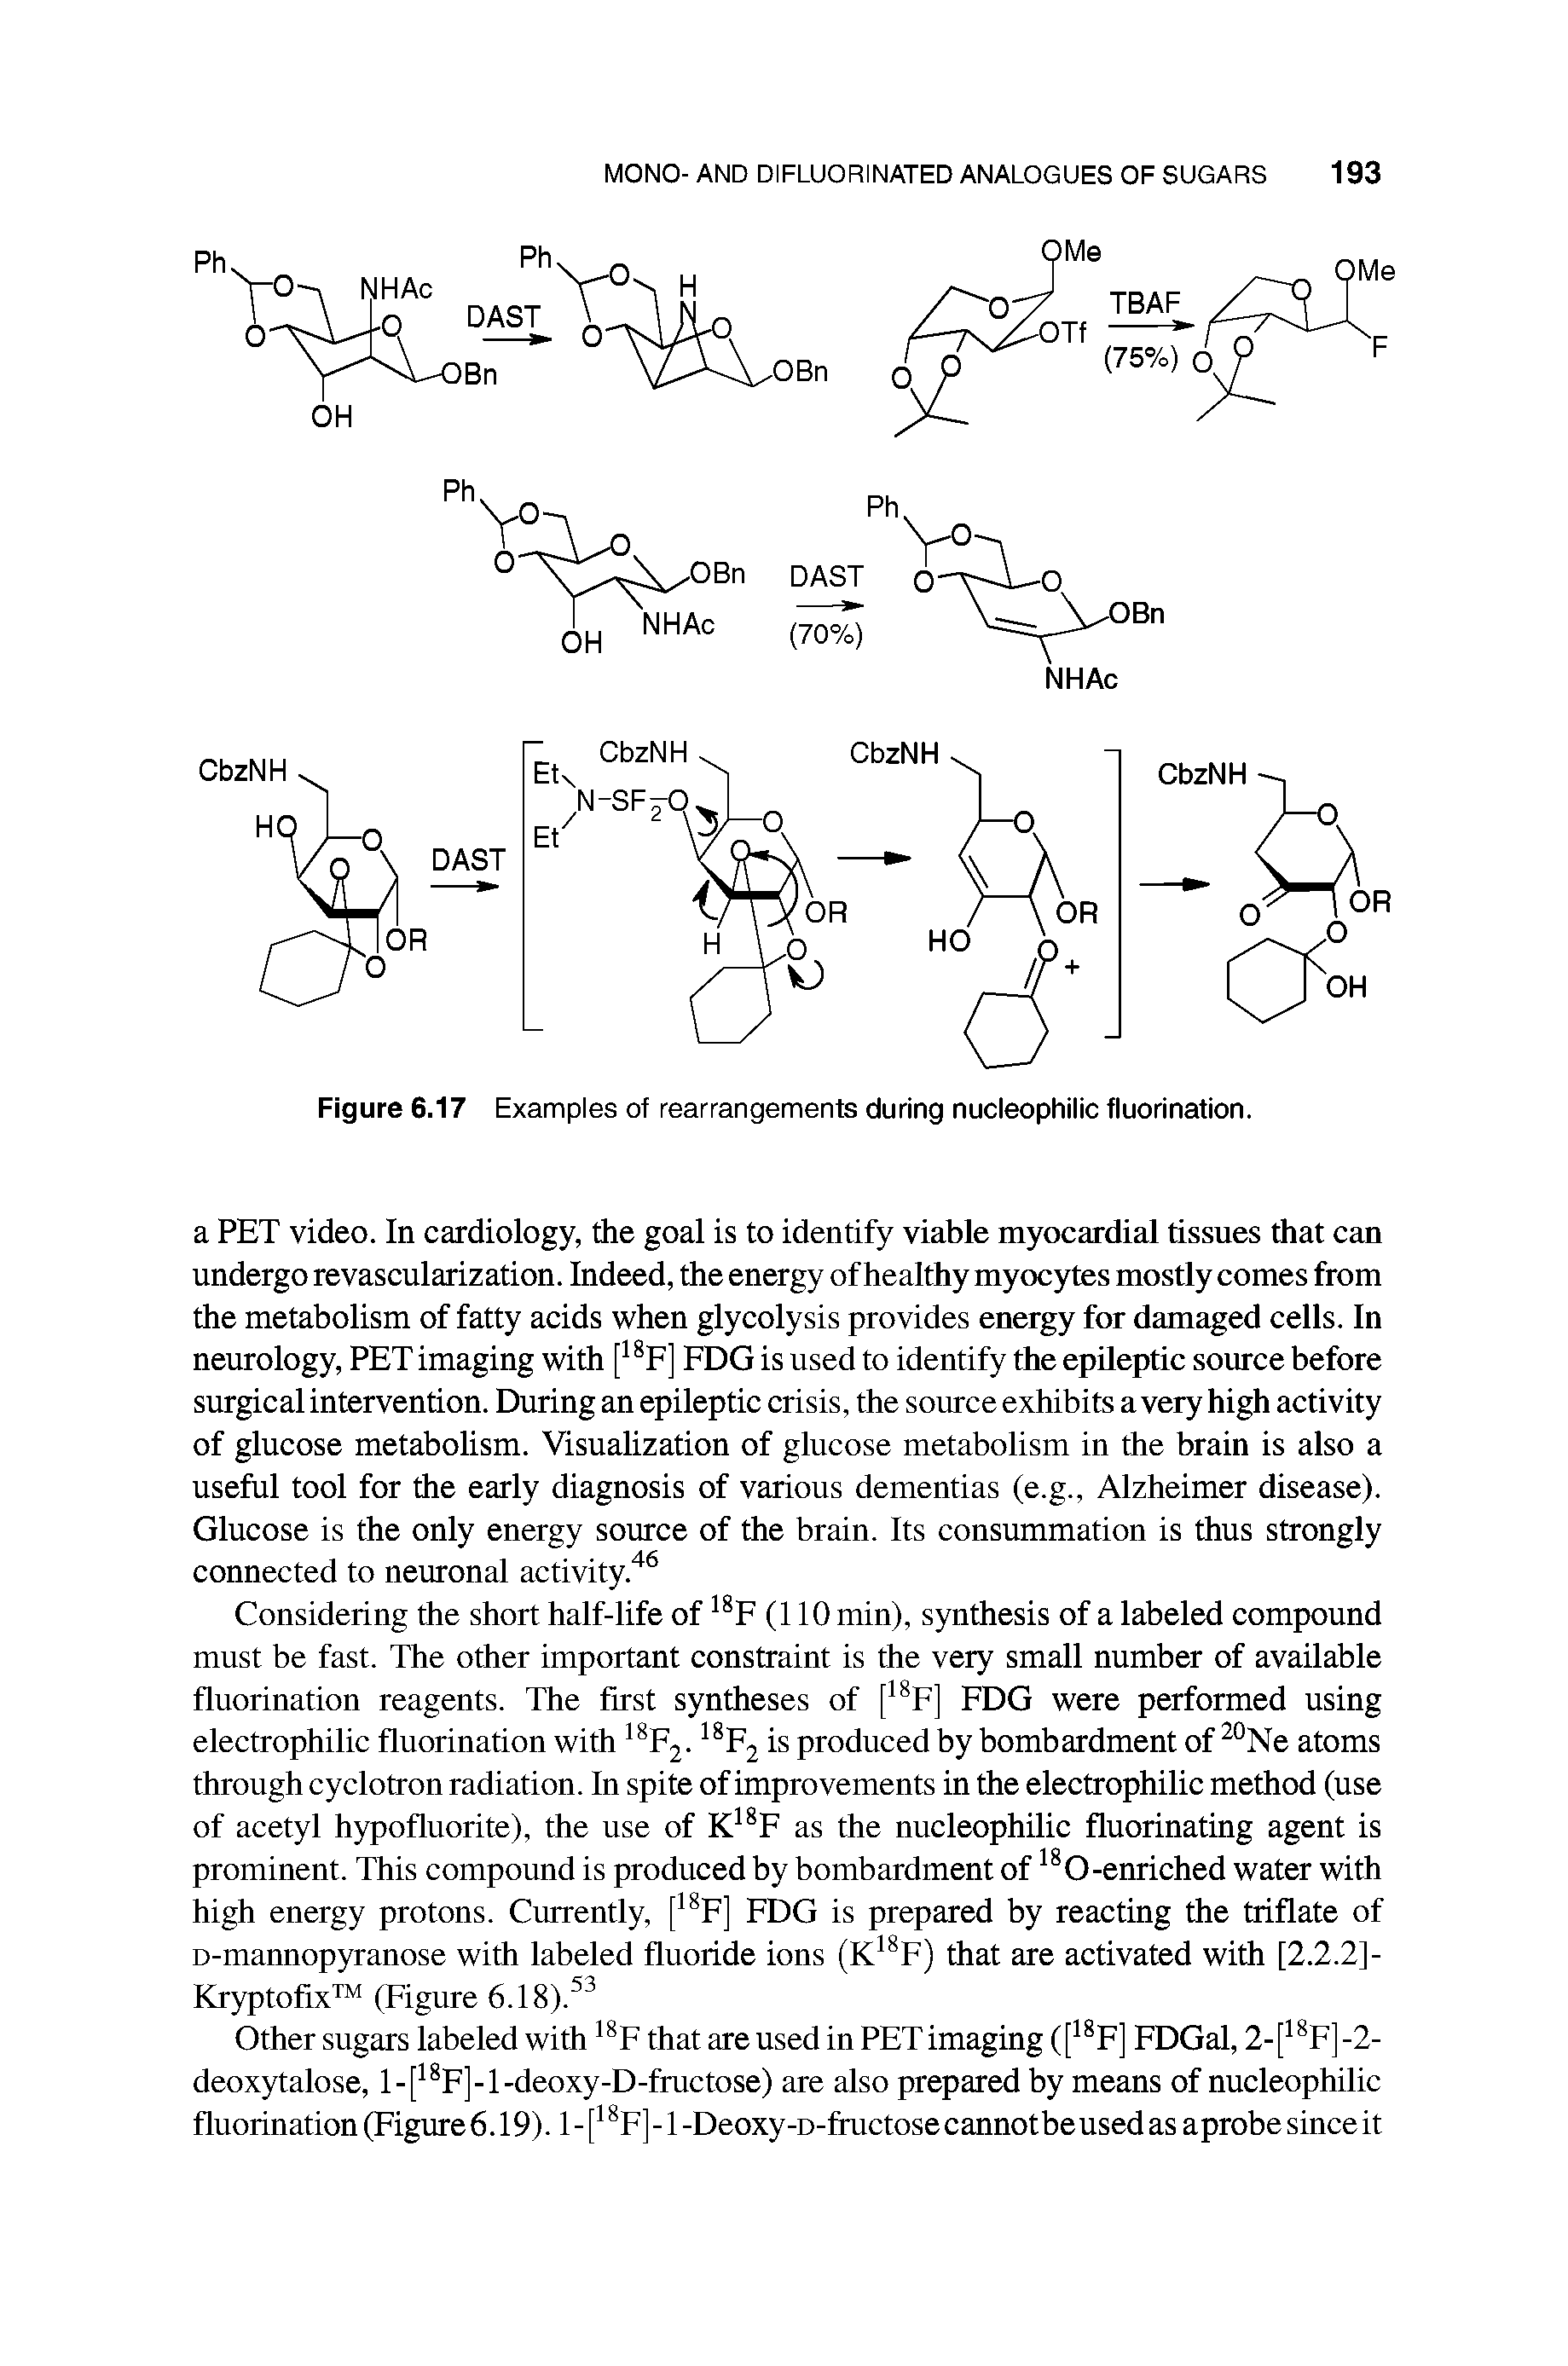 Figure 6.17 Examples of rearrangements during nucleophilic fluorination.